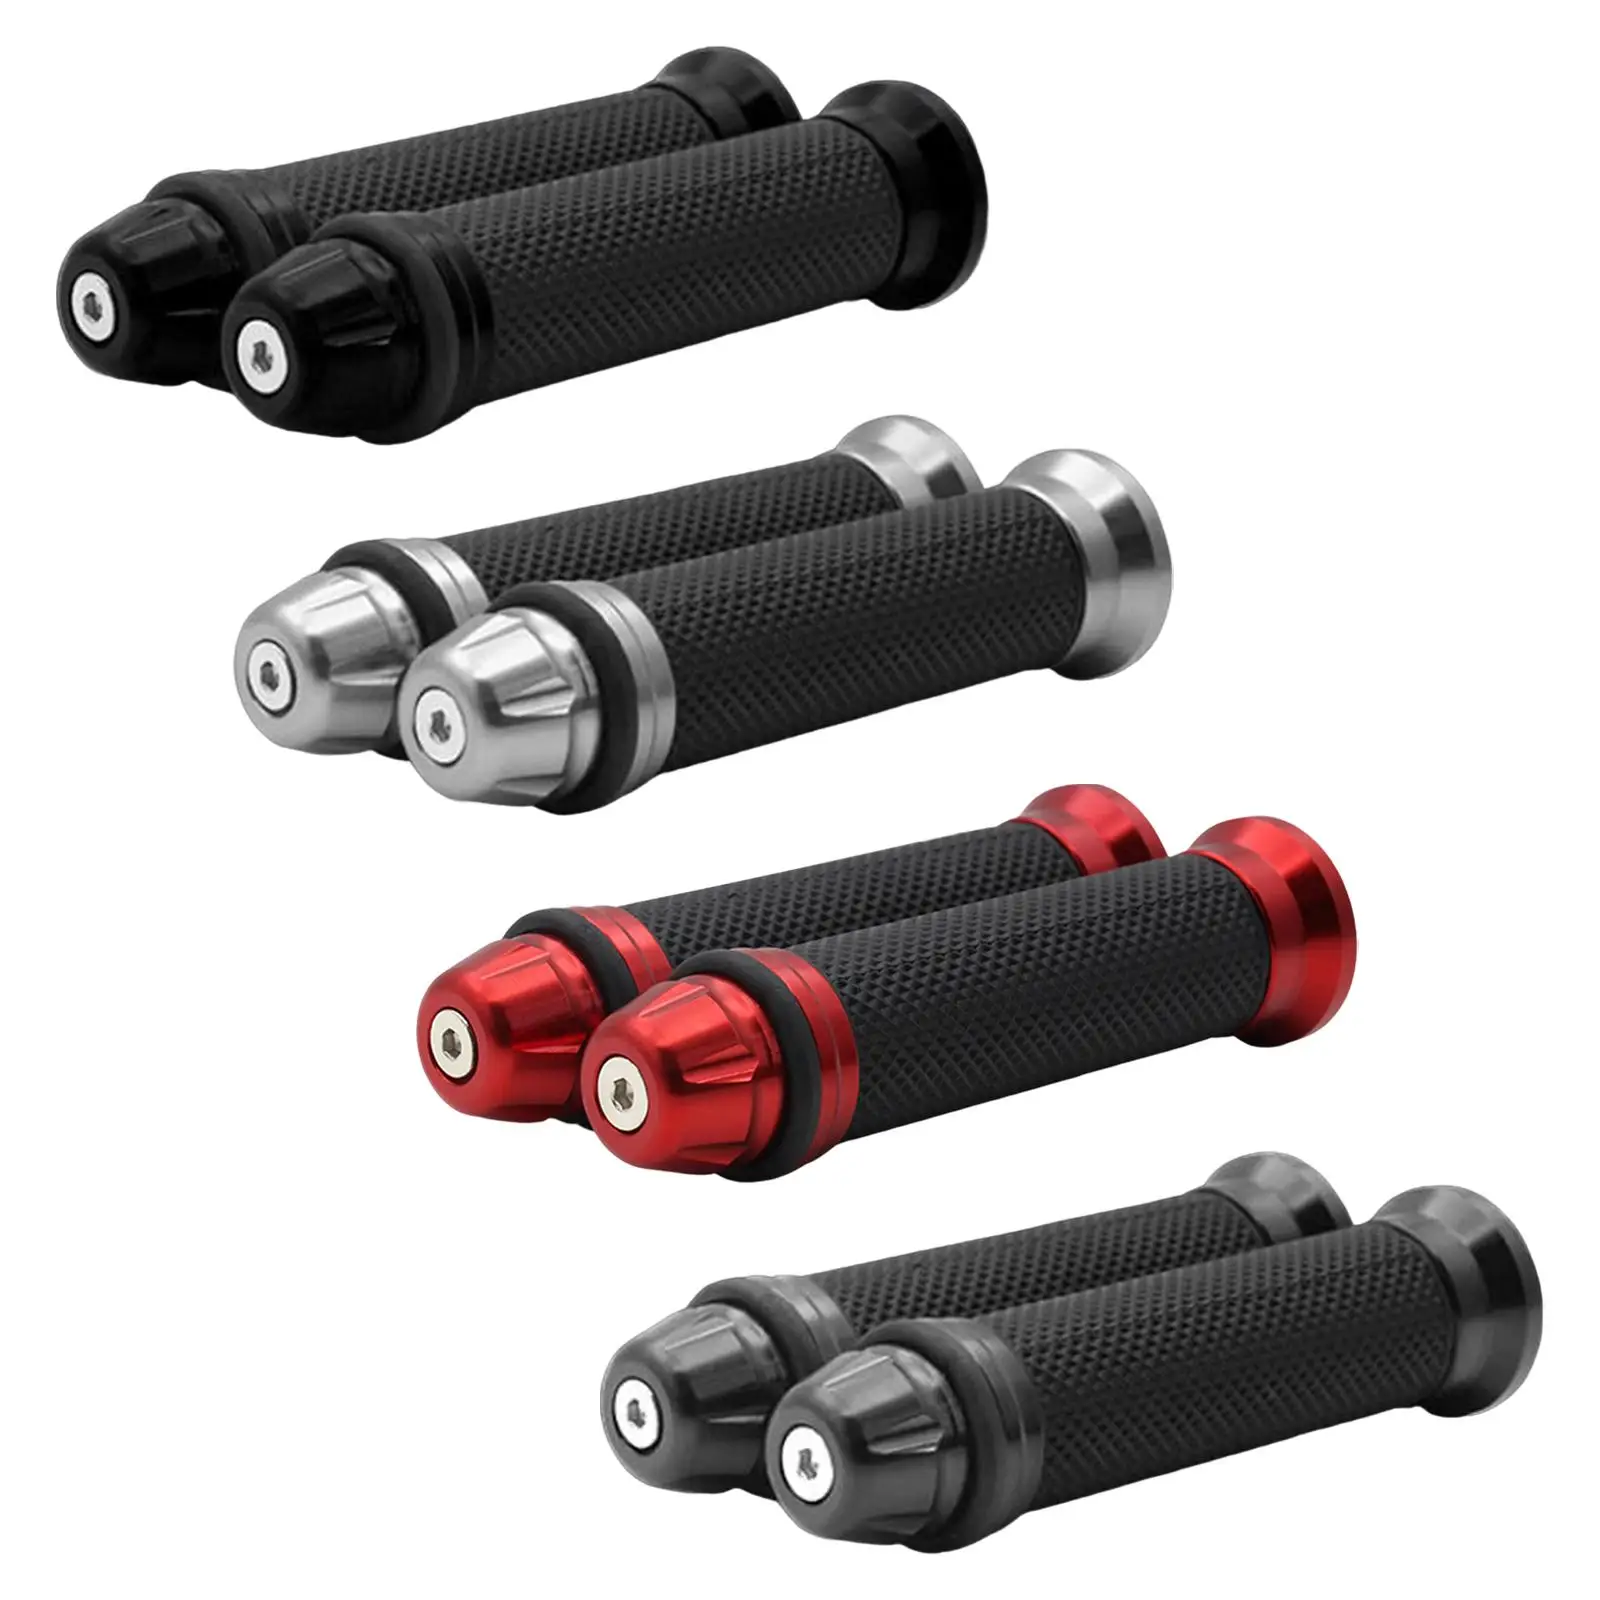 2x Motorbike Hand Grips Anti Skid to Hold Direct Replaces